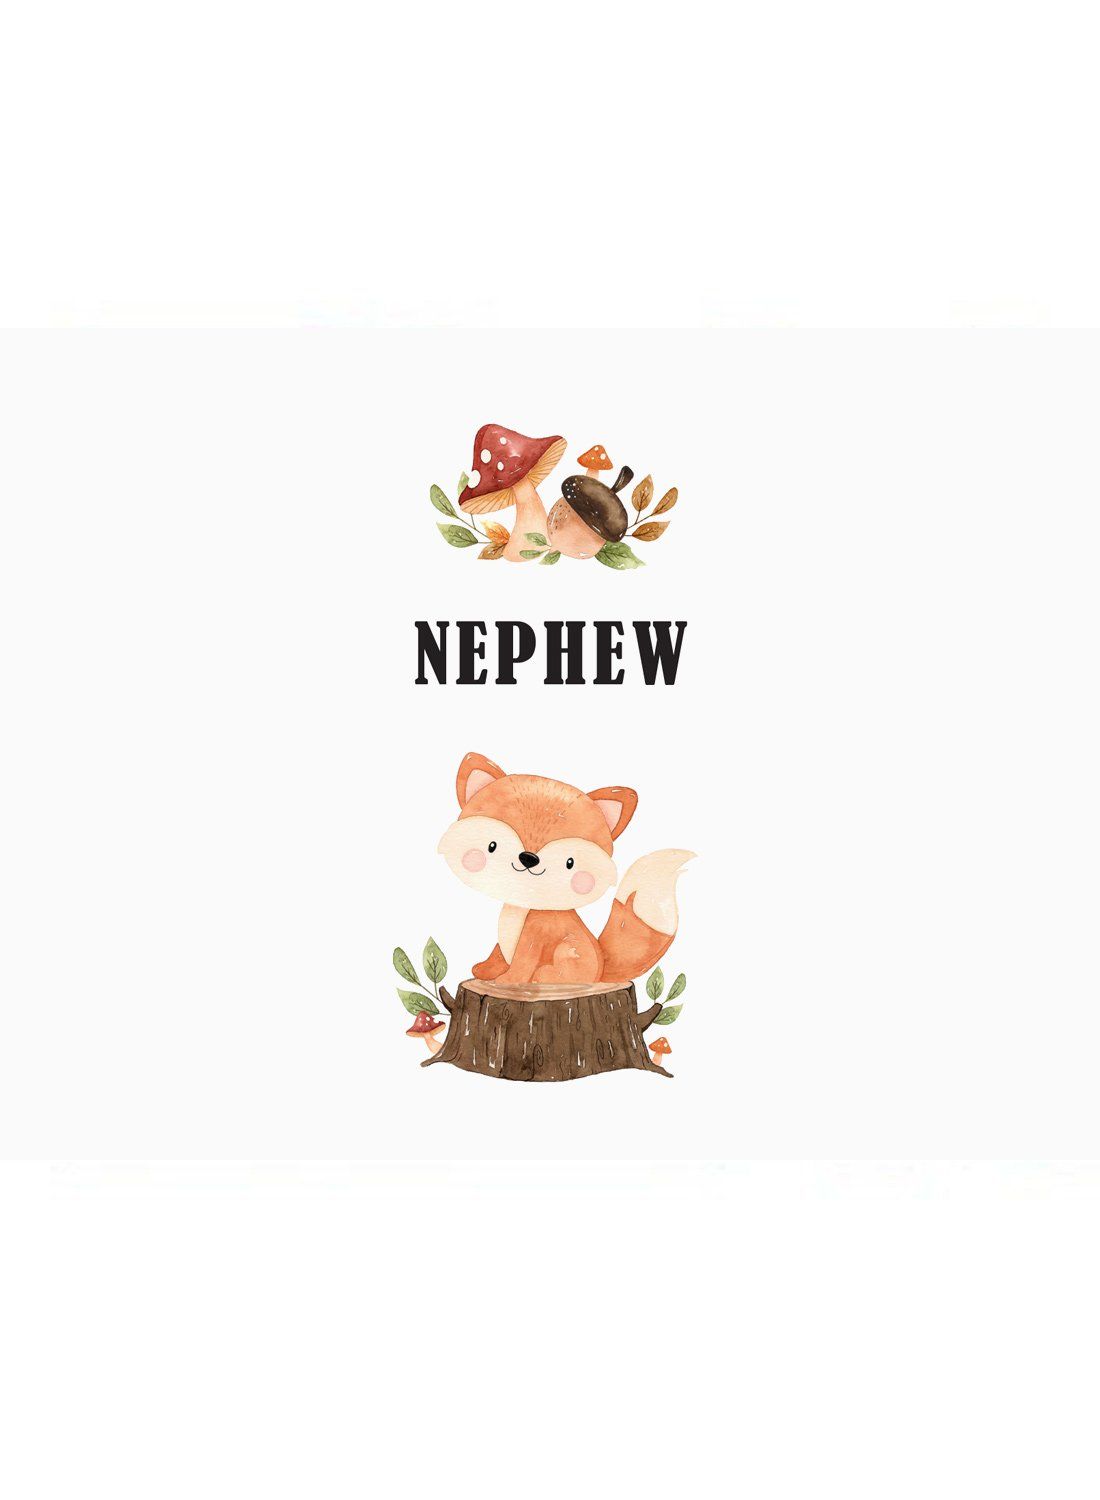 Nephew - New Baby Card - New baby card - Little Mouse Baby Clothing & Gifts